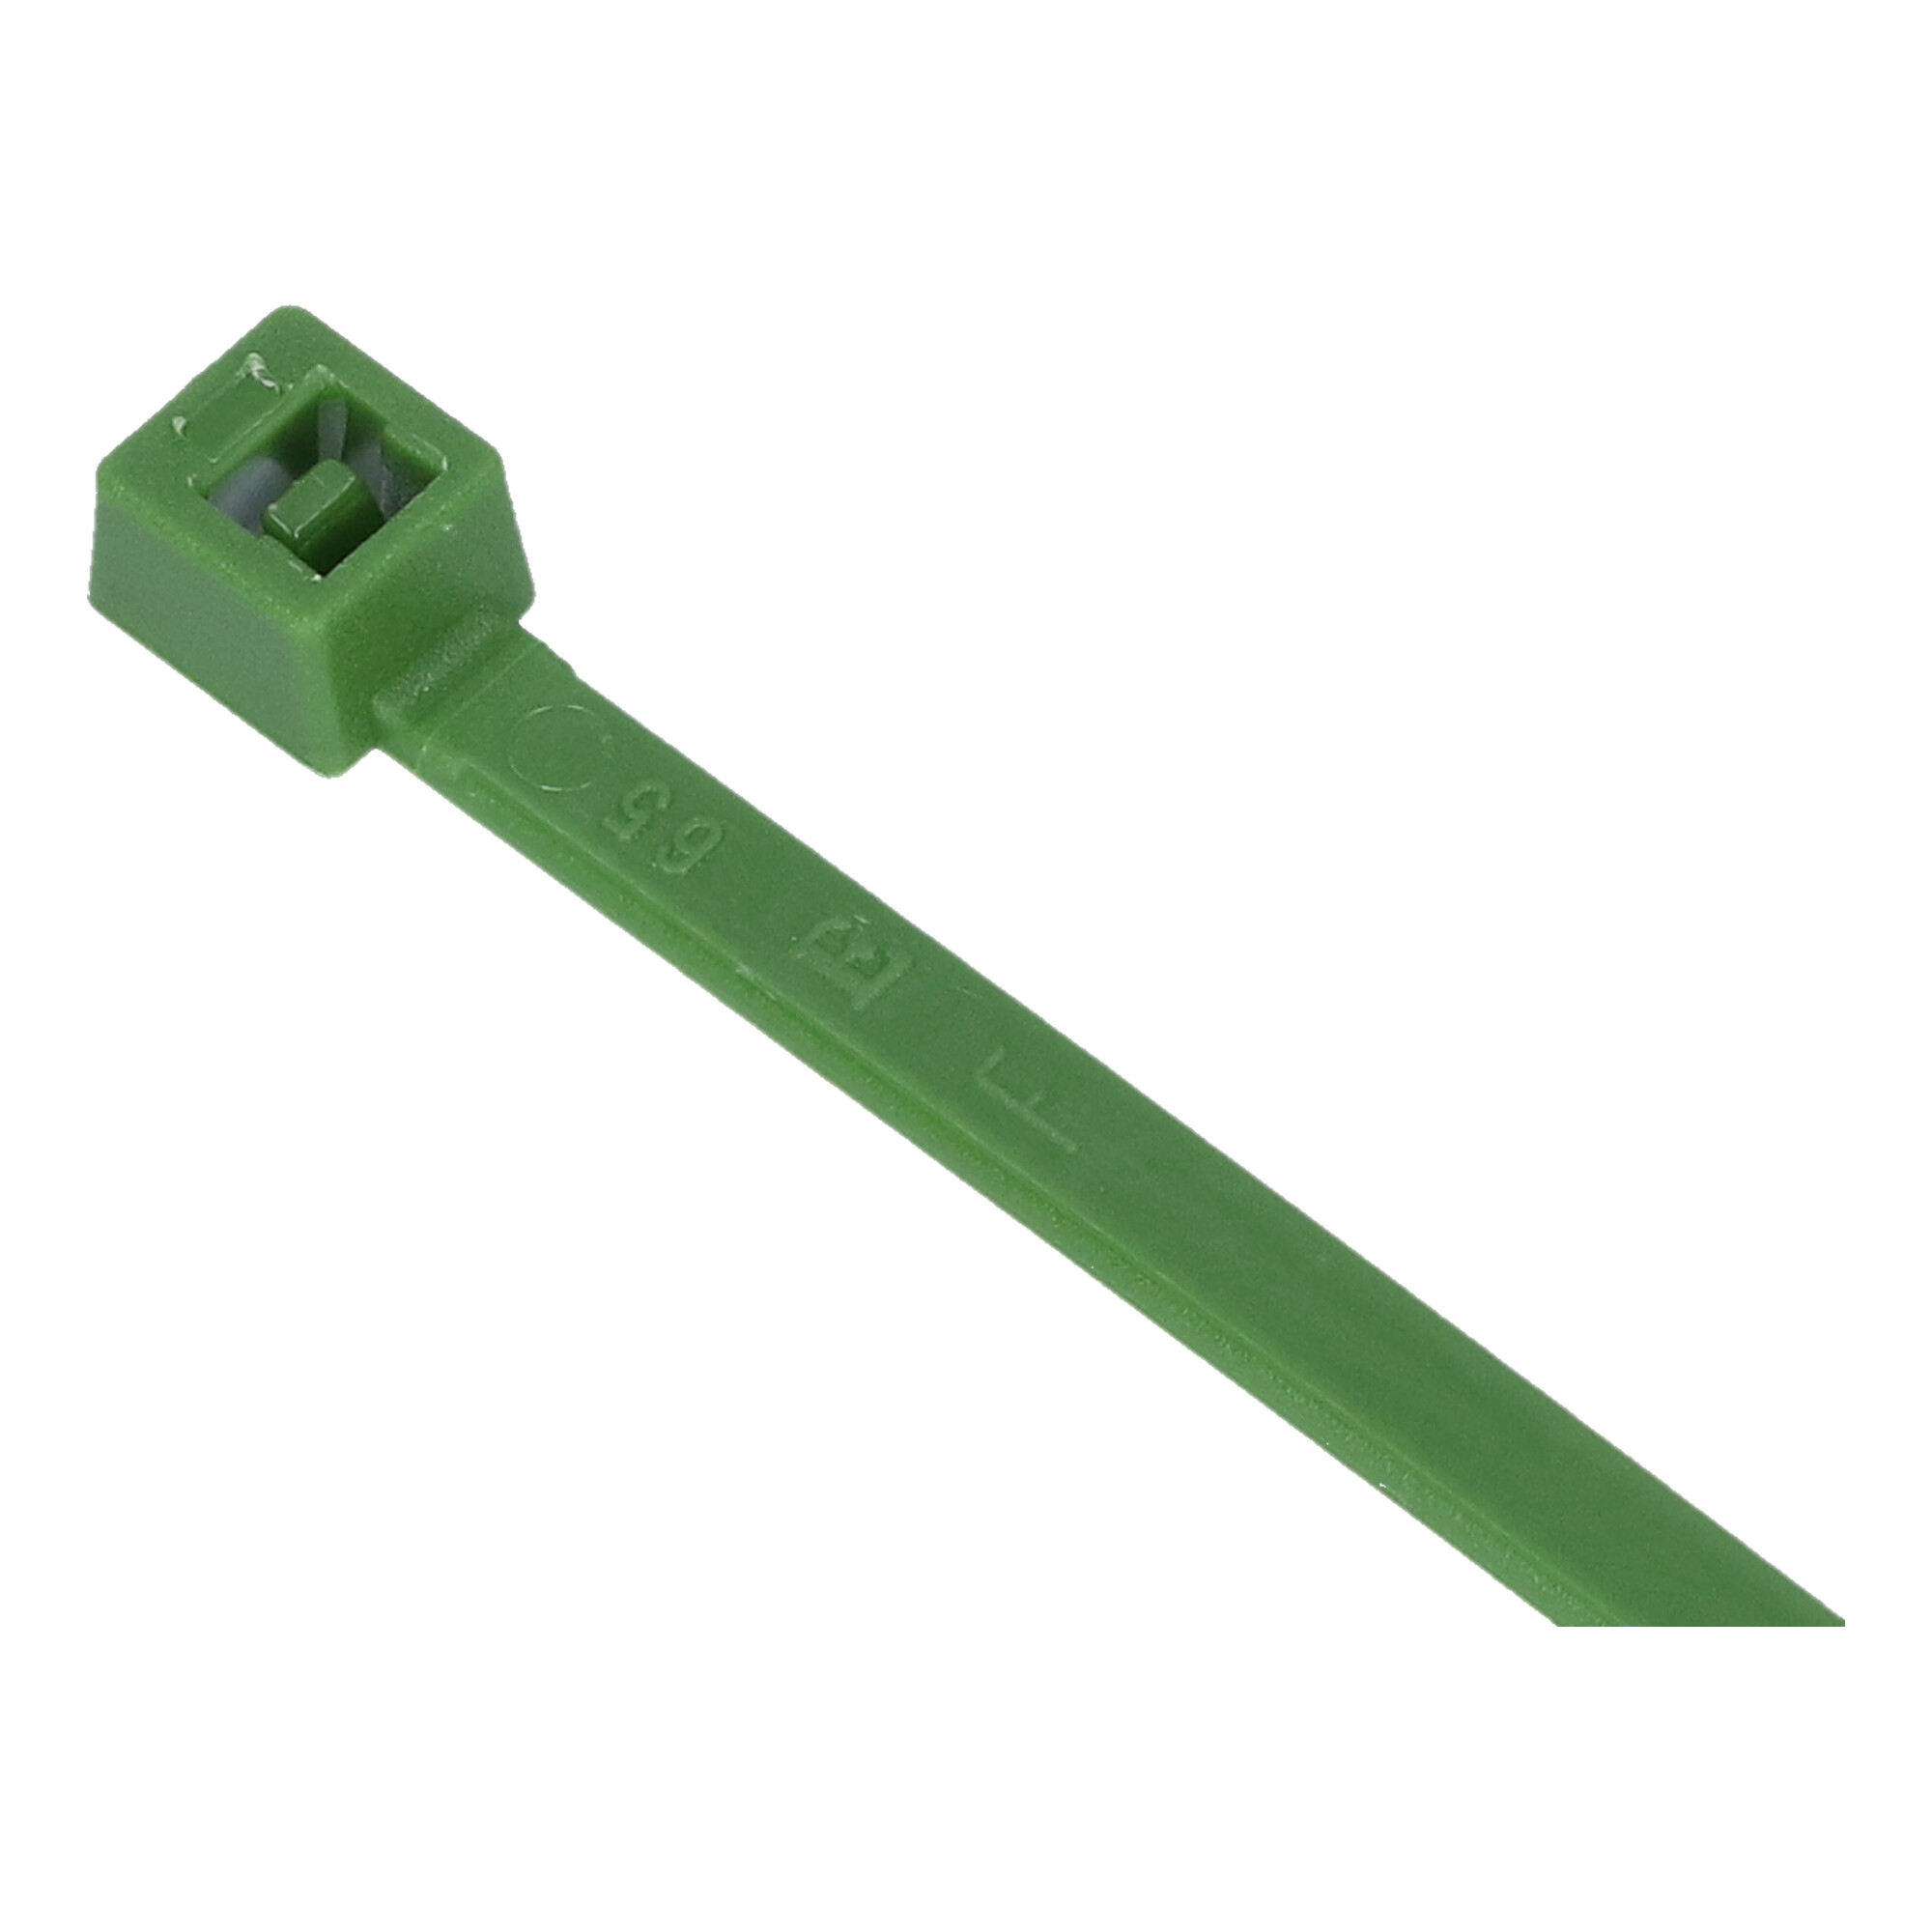 95-0200-035-VE Cable tie PA series